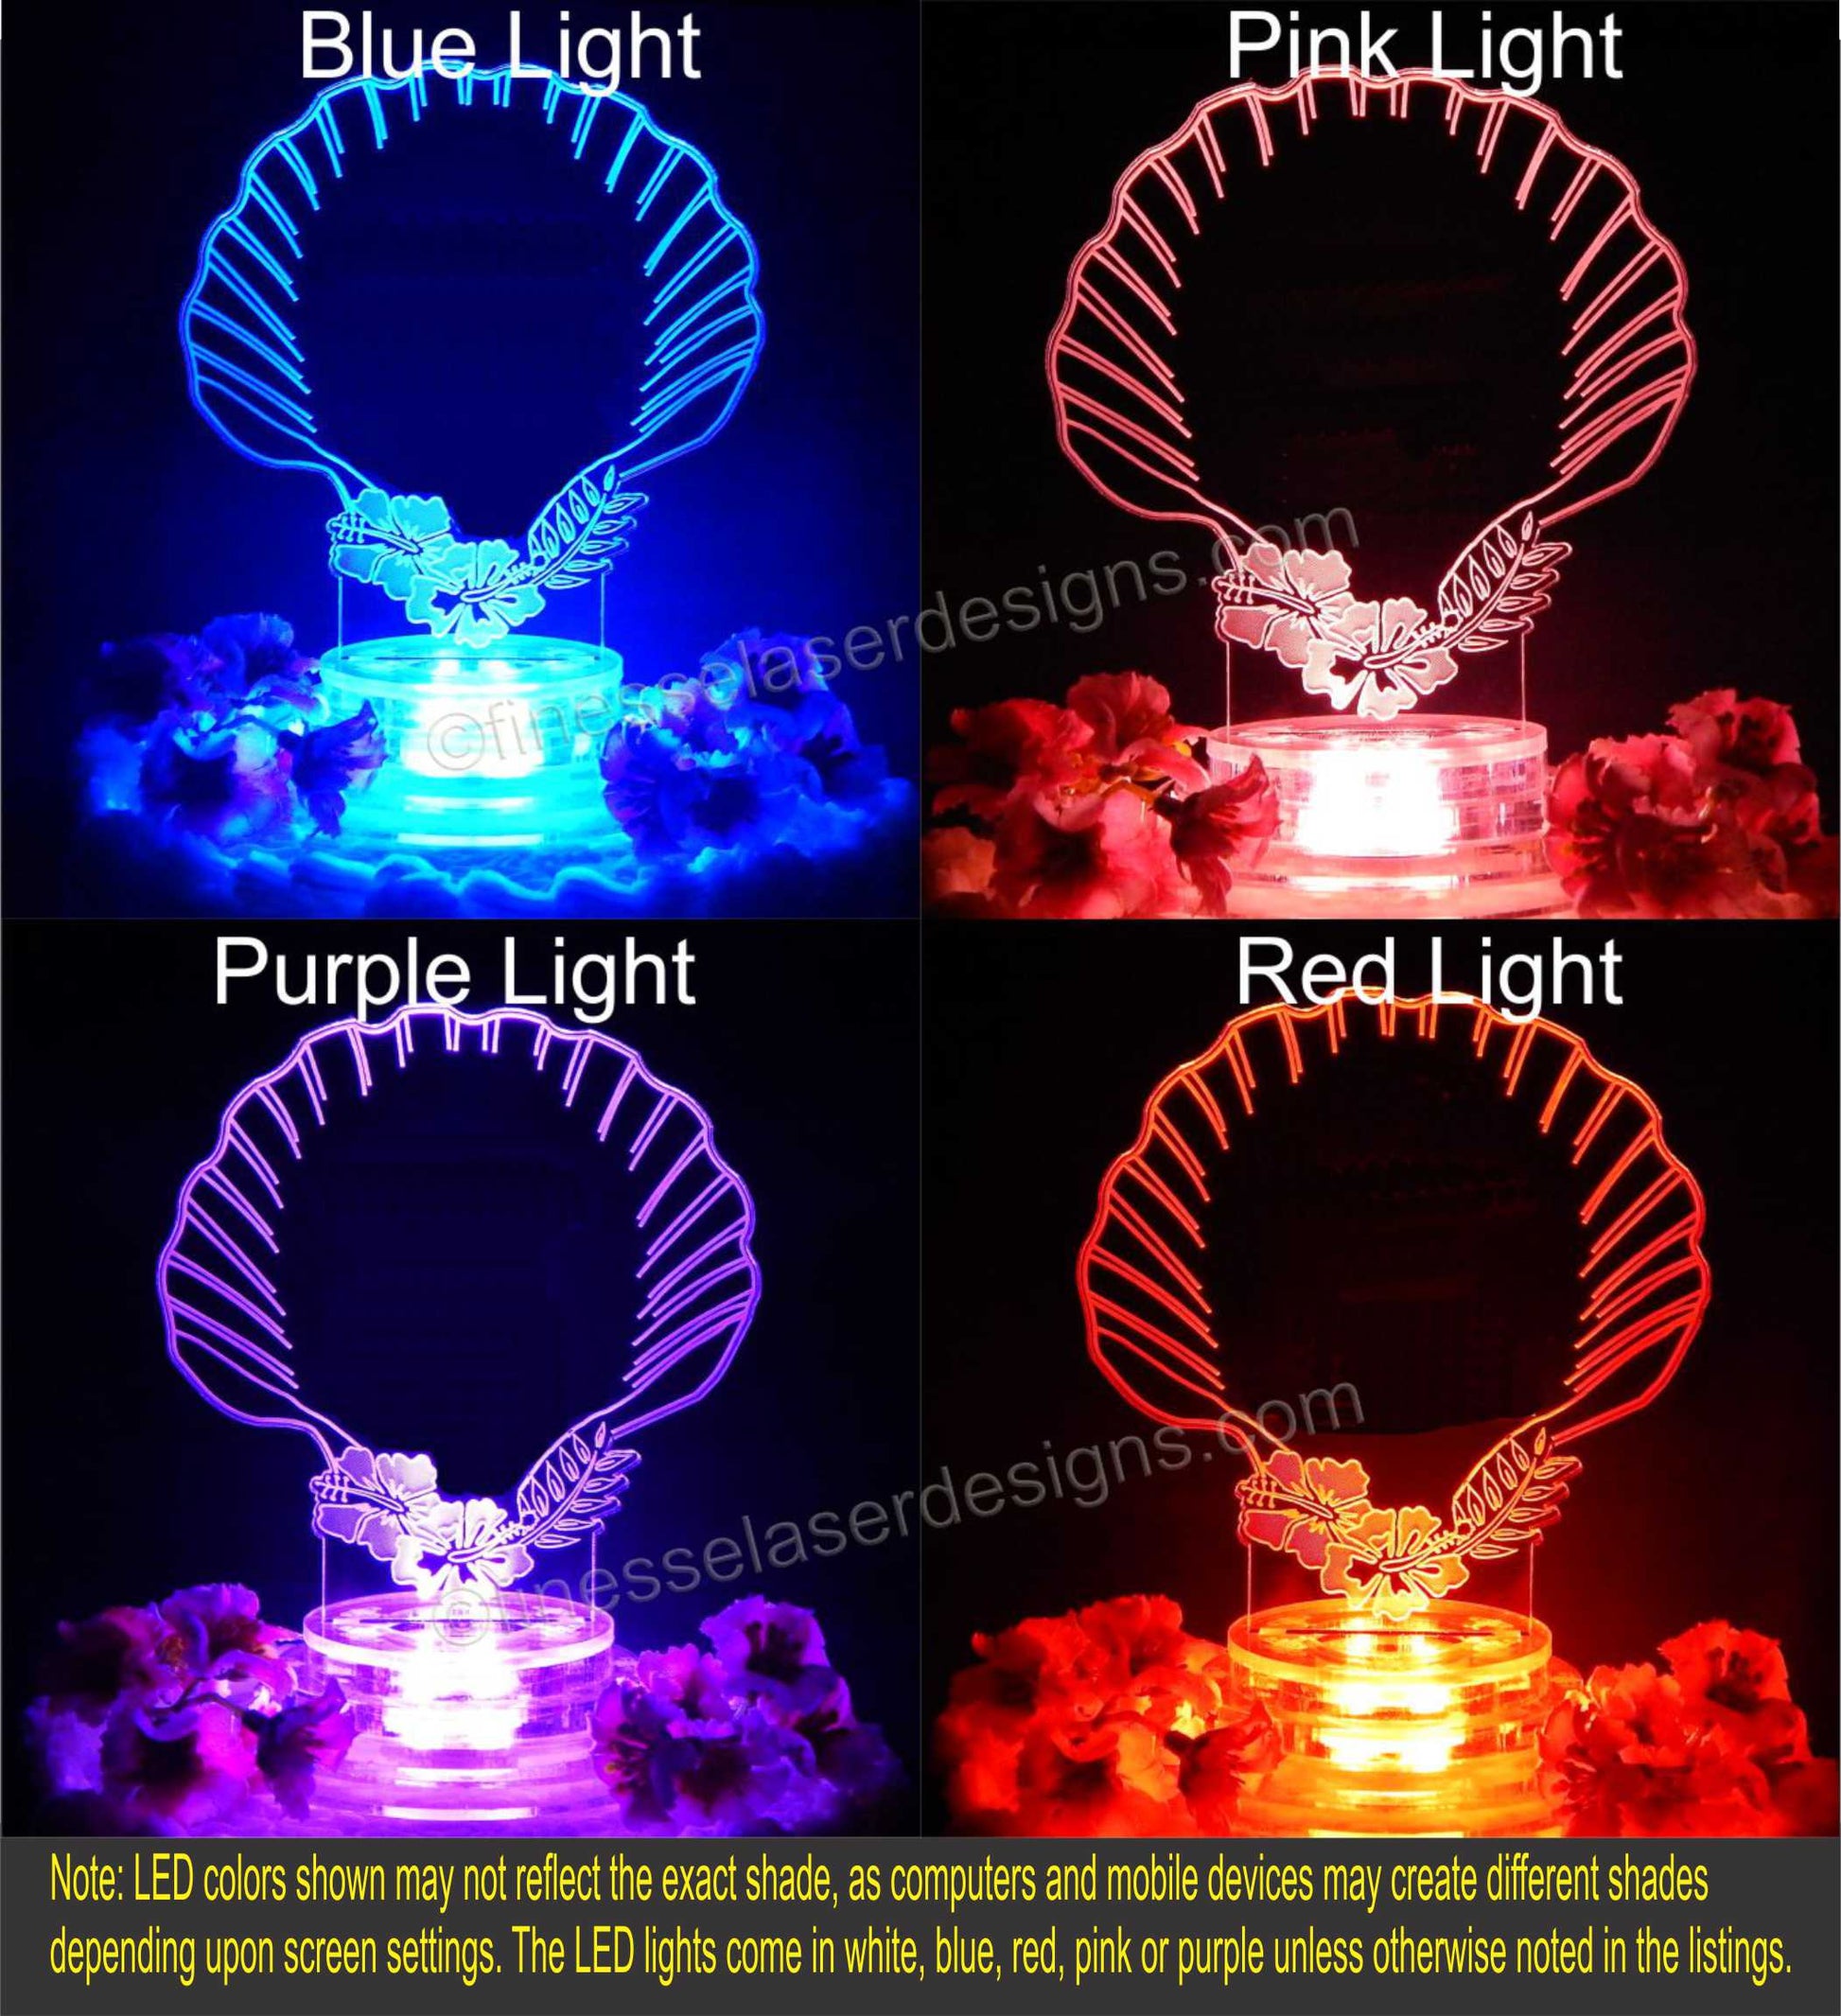 Colored lighted views of an acrylic seashel shaped cake topper, showing blue, pink, purple and red lighted views